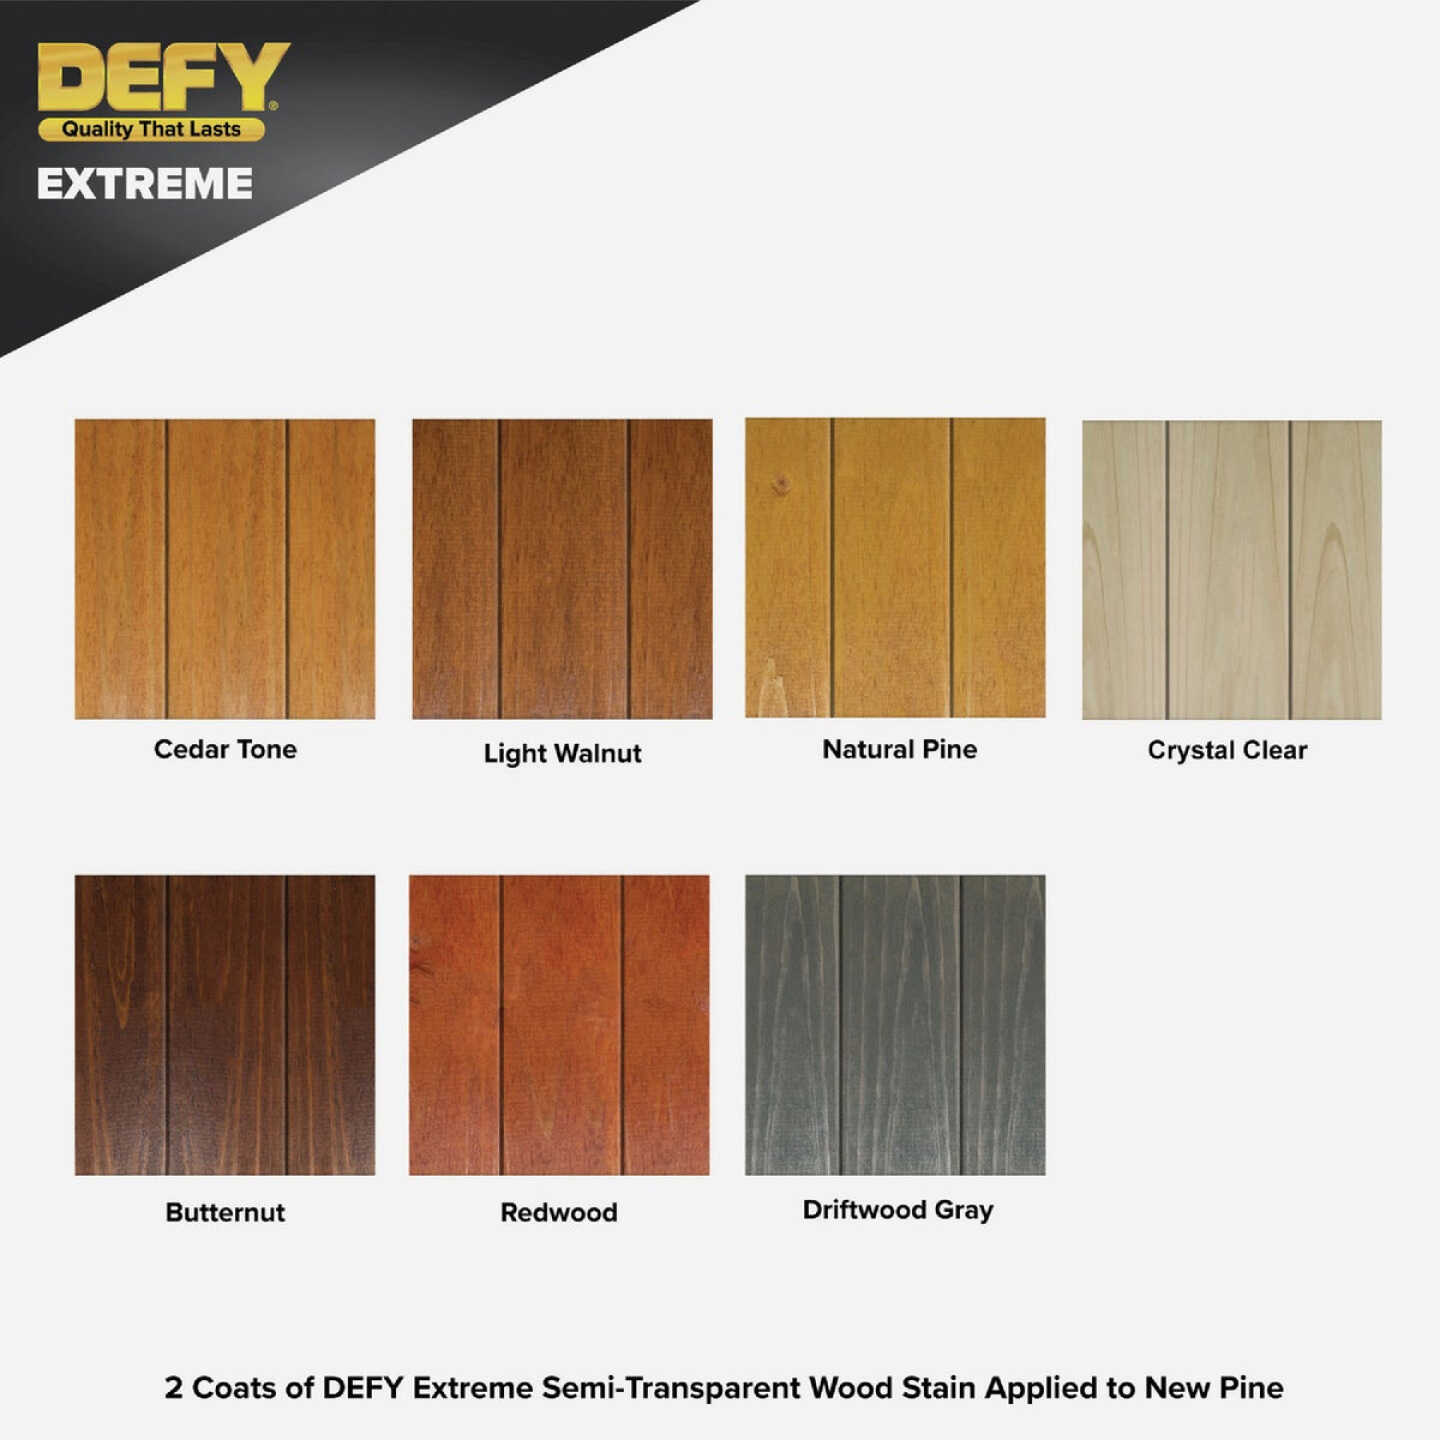 DEFY Extreme Semi-Transparent Exterior Wood Stain, Light Walnut, 1 Gal.  Bottle - Power Townsend Company